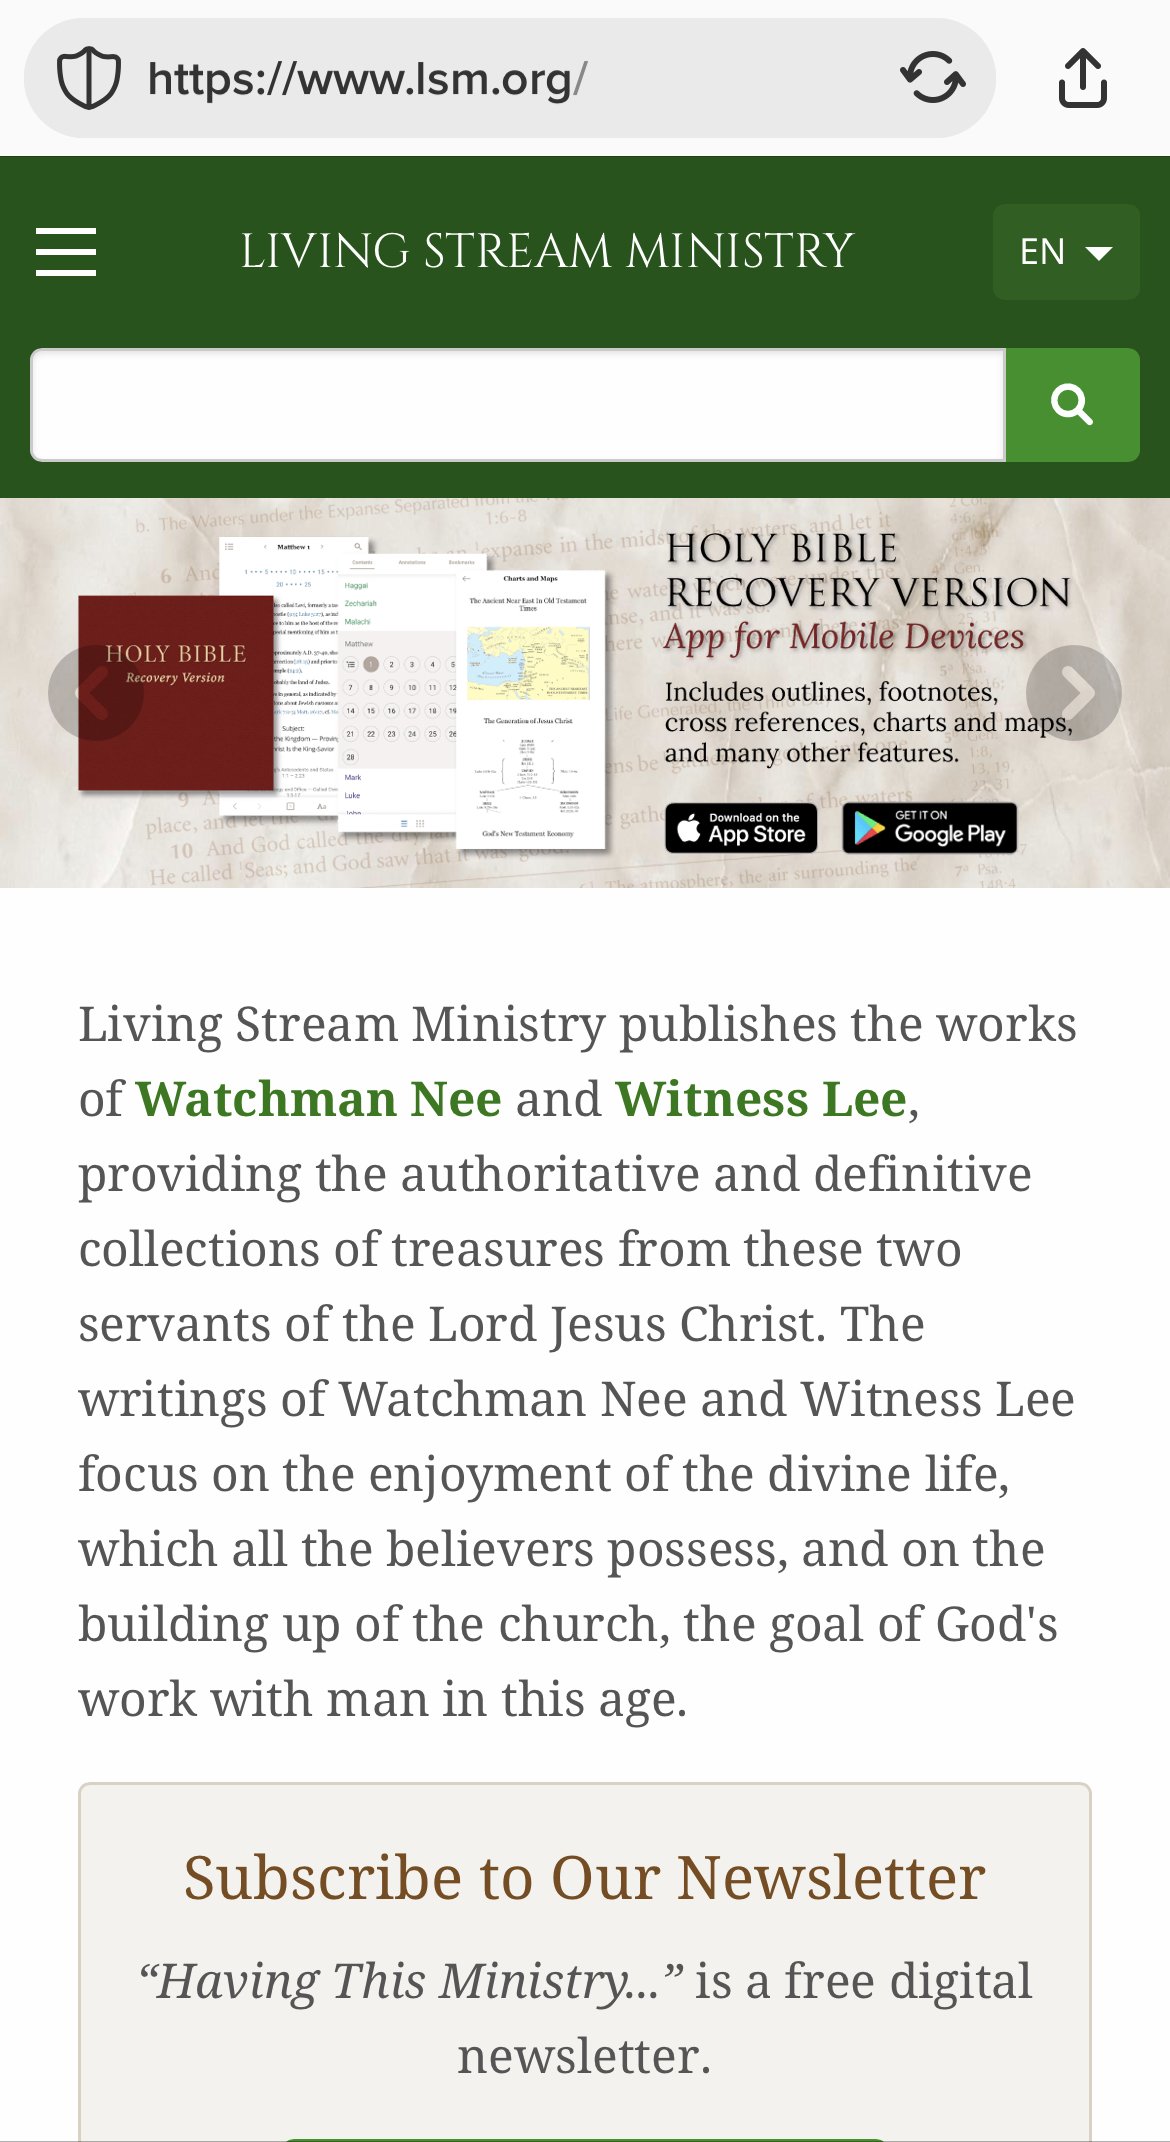 Living Stream Ministry: Publisher of Watchman Nee and Witness Lee 